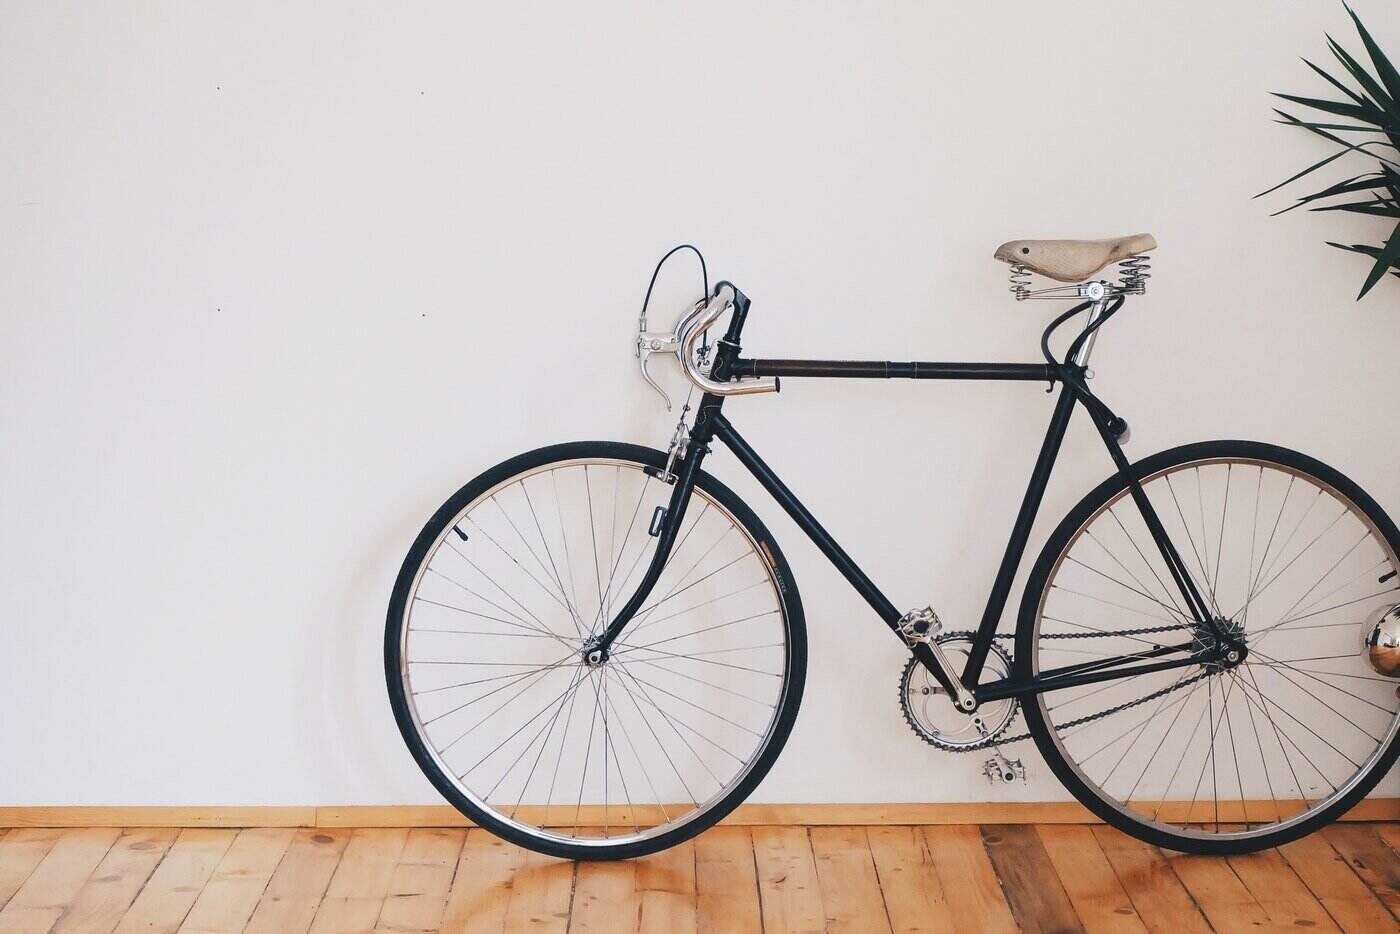 Bicycle leaning against wall on wooden floor - eco-friendly flooring options that might interest you